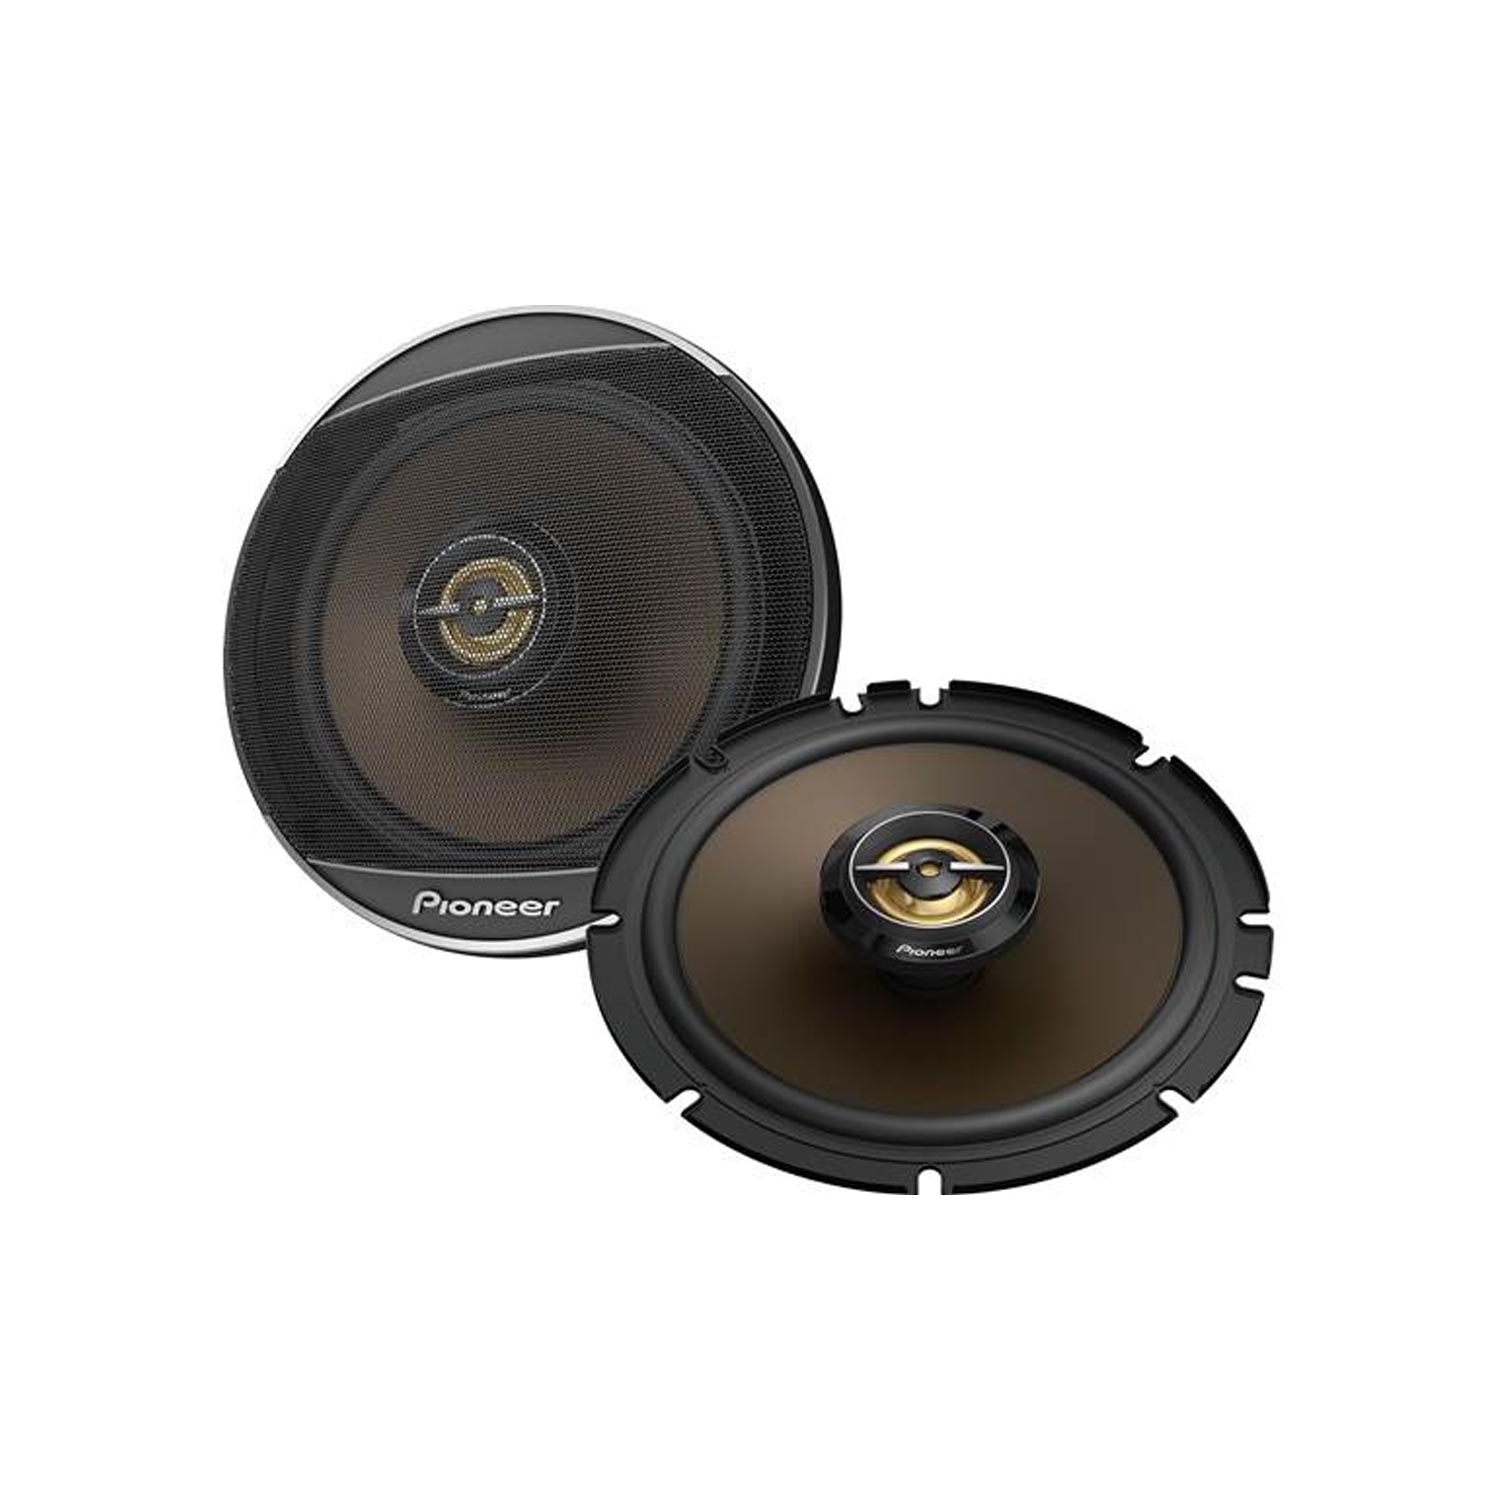 Pioneer TS-A653FH 6.5″ 2-way Coaxial Car Speakers | Best Buy Canada